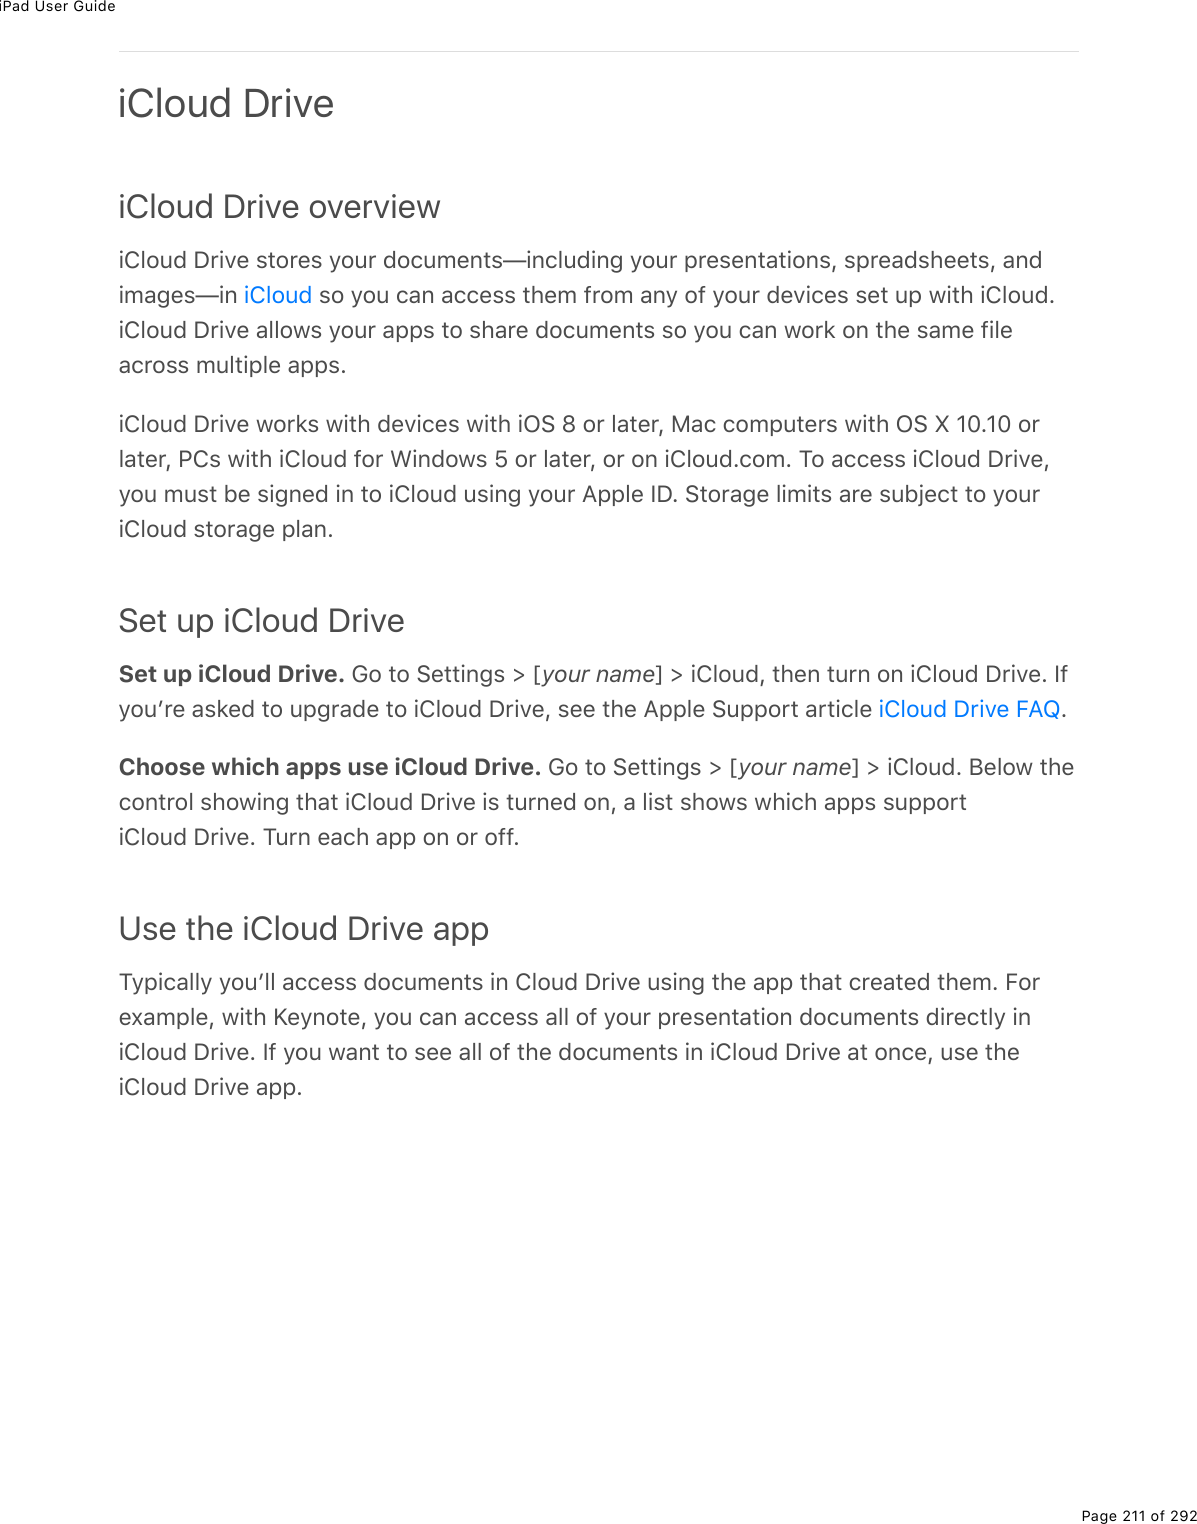 iPad User GuidePage 211 of 292iCloud DriveiCloud Drive overview.432&gt;7%P$.D(%&amp;&quot;2$(&amp;%=2&gt;$%72)&gt;/(0&quot;&amp;g.0)3&gt;7.0;%=2&gt;$%-$(&amp;(0&quot;#&quot;.20&amp;L%&amp;-$(#7&amp;*((&quot;&amp;L%#07./#;(&amp;g.0% %&amp;2%=2&gt;%)#0%#))(&amp;&amp;%&quot;*(/%9$2/%#0=%29%=2&gt;$%7(D.)(&amp;%&amp;(&quot;%&gt;-%1.&quot;*%.432&gt;7E.432&gt;7%P$.D(%#3321&amp;%=2&gt;$%#--&amp;%&quot;2%&amp;*#$(%72)&gt;/(0&quot;&amp;%&amp;2%=2&gt;%)#0%12$&apos;%20%&quot;*(%&amp;#/(%9.3(#)$2&amp;&amp;%/&gt;3&quot;.-3(%#--&amp;E.432&gt;7%P$.D(%12$&apos;&amp;%1.&quot;*%7(D.)(&amp;%1.&quot;*%.G!%l%2$%3#&quot;($L%8#)%)2/-&gt;&quot;($&amp;%1.&quot;*%G!%k%HIEHI%2$3#&quot;($L%@4&amp;%1.&quot;*%.432&gt;7%92$%&lt;.0721&amp;%^%2$%3#&quot;($L%2$%20%.432&gt;7E)2/E%M2%#))(&amp;&amp;%.432&gt;7%P$.D(L=2&gt;%/&gt;&amp;&quot;%5(%&amp;.;0(7%.0%&quot;2%.432&gt;7%&gt;&amp;.0;%=2&gt;$%?--3(%SPE%!&quot;2$#;(%3./.&quot;&amp;%#$(%&amp;&gt;5U()&quot;%&quot;2%=2&gt;$.432&gt;7%&amp;&quot;2$#;(%-3#0ESet up iCloud DriveSet up iCloud Drive. 62%&quot;2%!(&quot;&quot;.0;&amp;%[%myour namen%[%.432&gt;7L%&quot;*(0%&quot;&gt;$0%20%.432&gt;7%P$.D(E%S9=2&gt;F$(%#&amp;&apos;(7%&quot;2%&gt;-;$#7(%&quot;2%.432&gt;7%P$.D(L%&amp;((%&quot;*(%?--3(%!&gt;--2$&quot;%#$&quot;.)3(% EChoose which apps use iCloud Drive. 62%&quot;2%!(&quot;&quot;.0;&amp;%[%myour namen%[%.432&gt;7E%J(321%&quot;*()20&quot;$23%&amp;*21.0;%&quot;*#&quot;%.432&gt;7%P$.D(%.&amp;%&quot;&gt;$0(7%20L%#%3.&amp;&quot;%&amp;*21&amp;%1*.)*%#--&amp;%&amp;&gt;--2$&quot;.432&gt;7%P$.D(E%M&gt;$0%(#)*%#--%20%2$%299EUse the iCloud Drive appM=-.)#33=%=2&gt;F33%#))(&amp;&amp;%72)&gt;/(0&quot;&amp;%.0%432&gt;7%P$.D(%&gt;&amp;.0;%&quot;*(%#--%&quot;*#&quot;%)$(#&quot;(7%&quot;*(/E%B2$(,#/-3(L%1.&quot;*%`(=02&quot;(L%=2&gt;%)#0%#))(&amp;&amp;%#33%29%=2&gt;$%-$(&amp;(0&quot;#&quot;.20%72)&gt;/(0&quot;&amp;%7.$()&quot;3=%.0.432&gt;7%P$.D(E%S9%=2&gt;%1#0&quot;%&quot;2%&amp;((%#33%29%&quot;*(%72)&gt;/(0&quot;&amp;%.0%.432&gt;7%P$.D(%#&quot;%20)(L%&gt;&amp;(%&quot;*(.432&gt;7%P$.D(%#--E.432&gt;7.432&gt;7%P$.D(%B?q